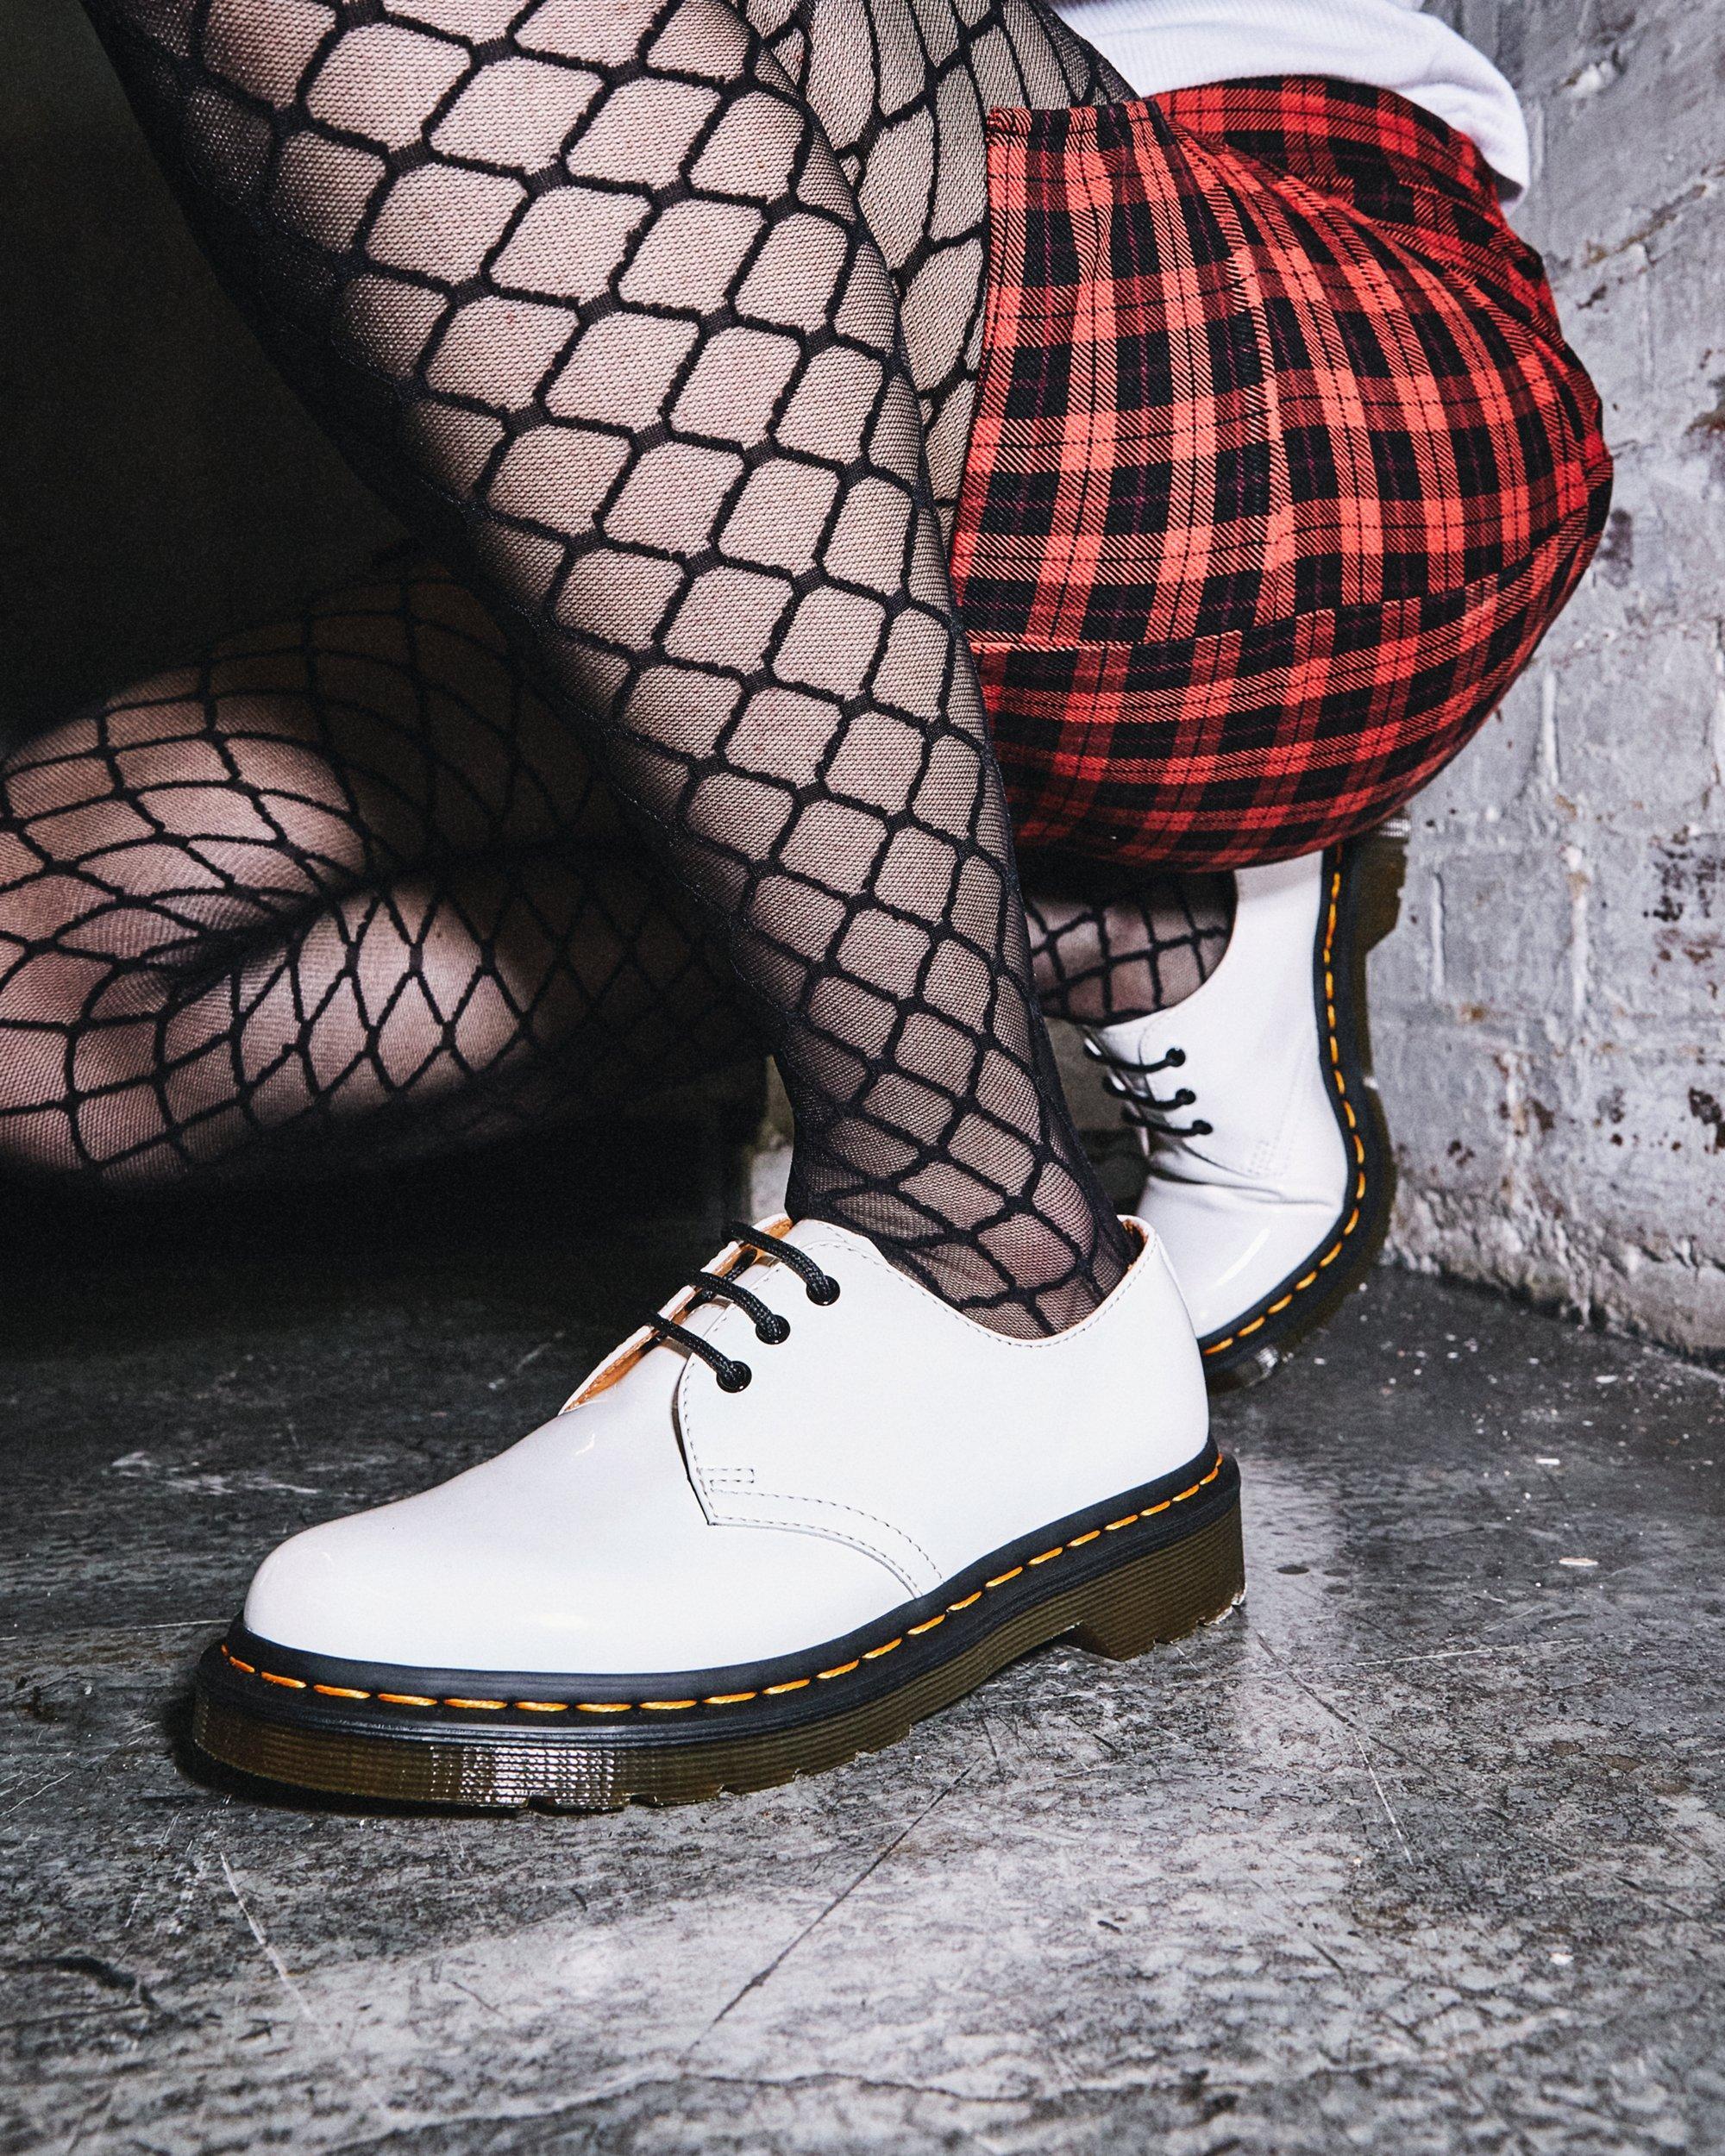 Dr. Martens 1461 Patent Leather Oxford Shoes in White - Lyst